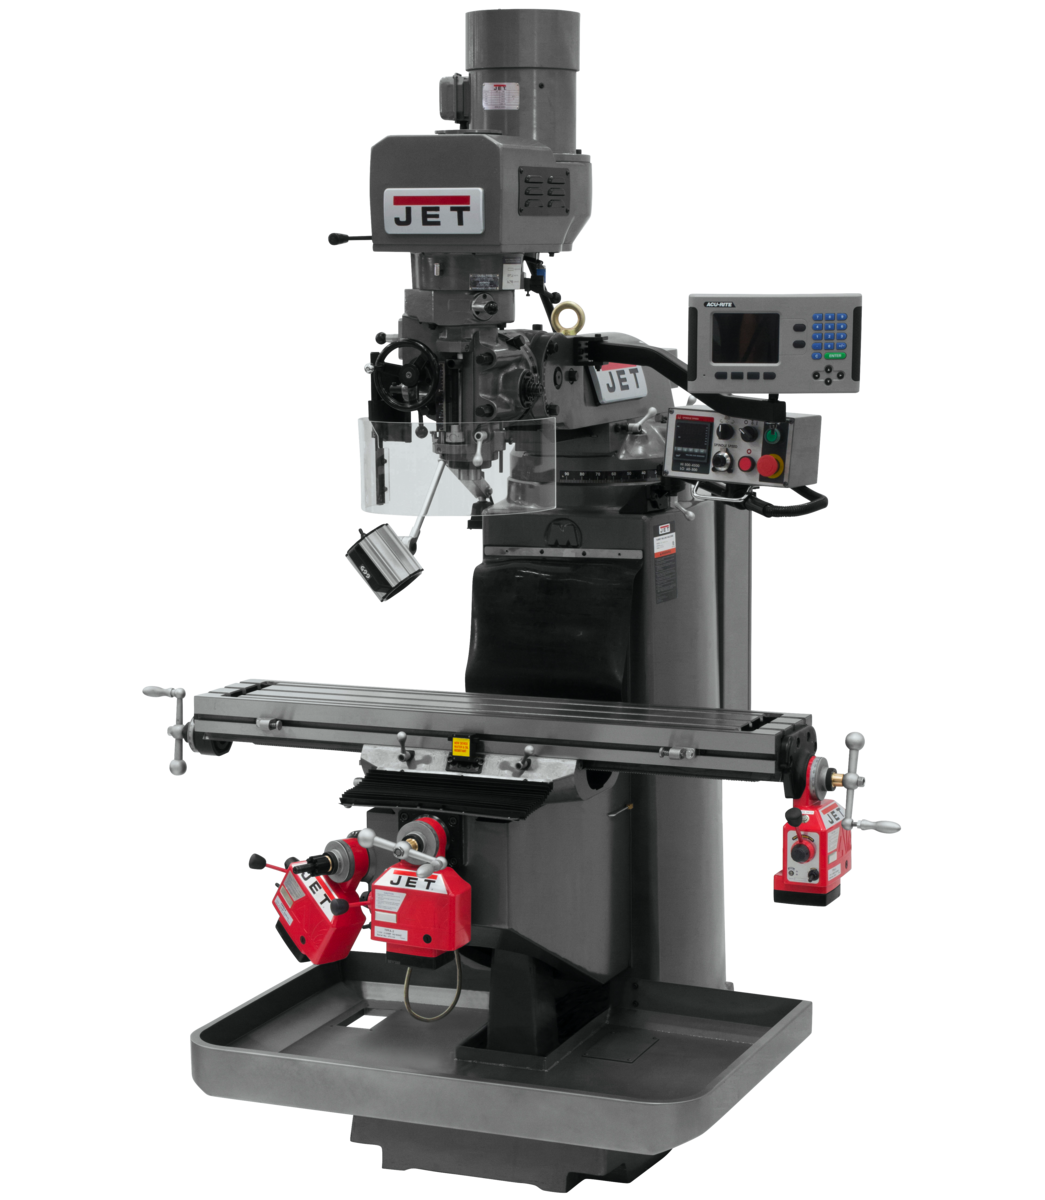 JTM-949EVS Mill With Acu-Rite 203 DRO With X, Y and Z-Axis Powerfeeds